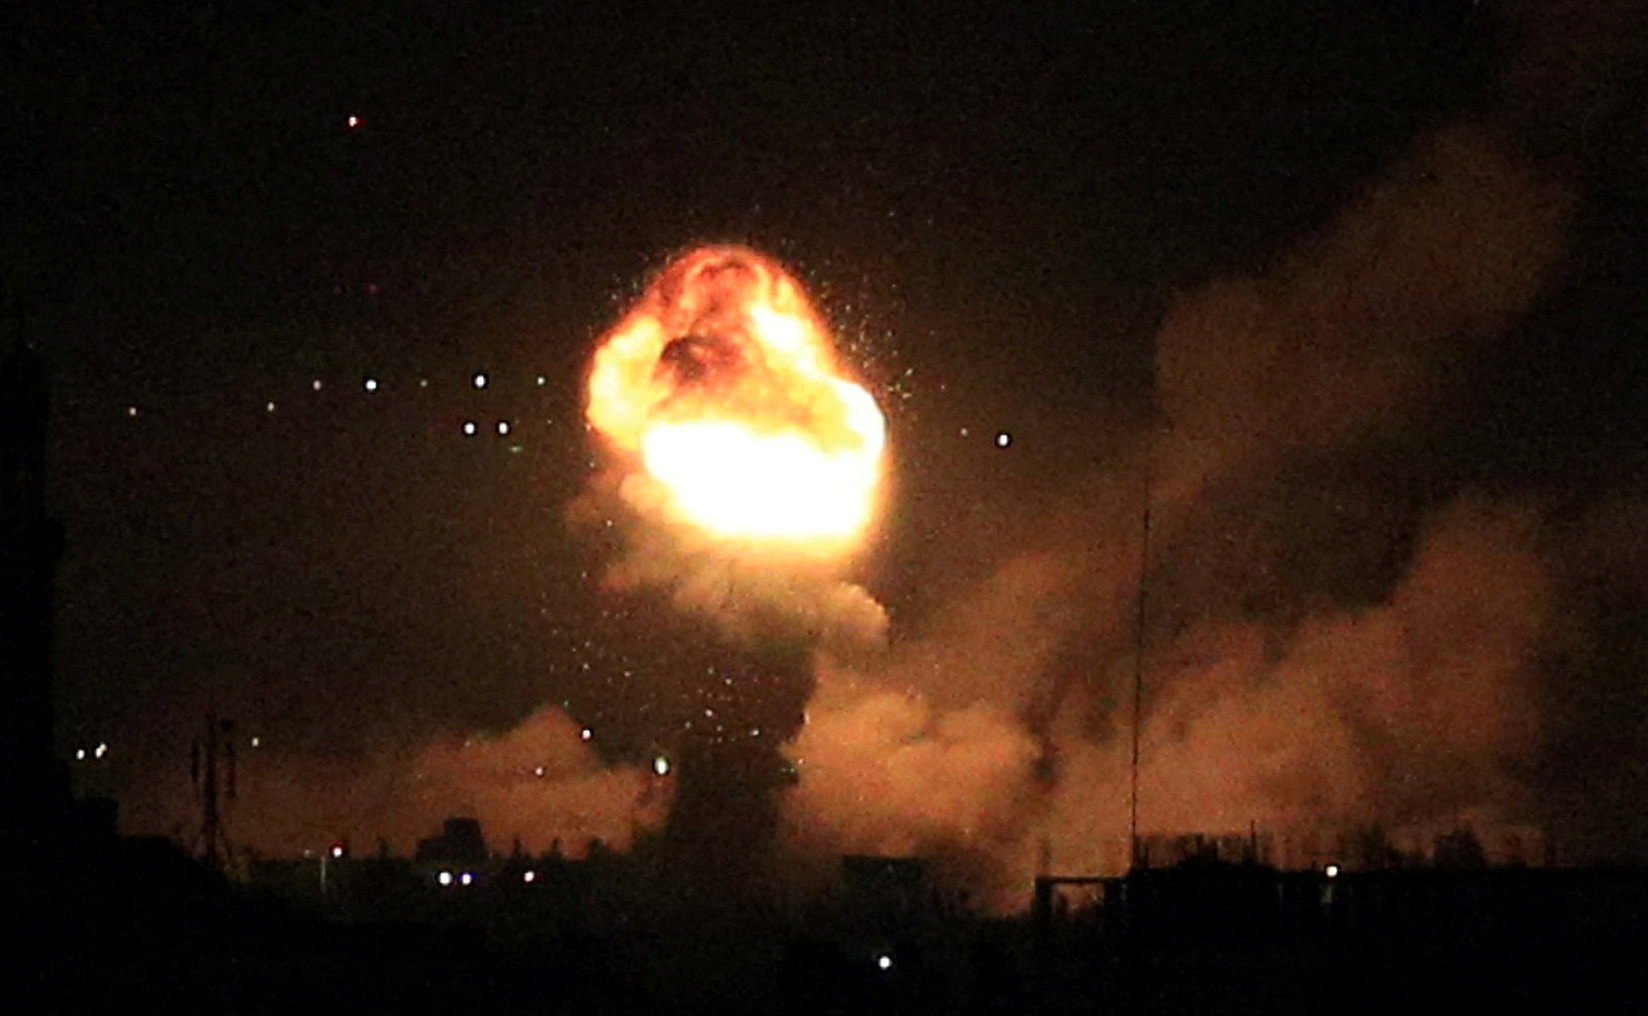 Smoke and flames rise during Israeli airstrikes in Gaza